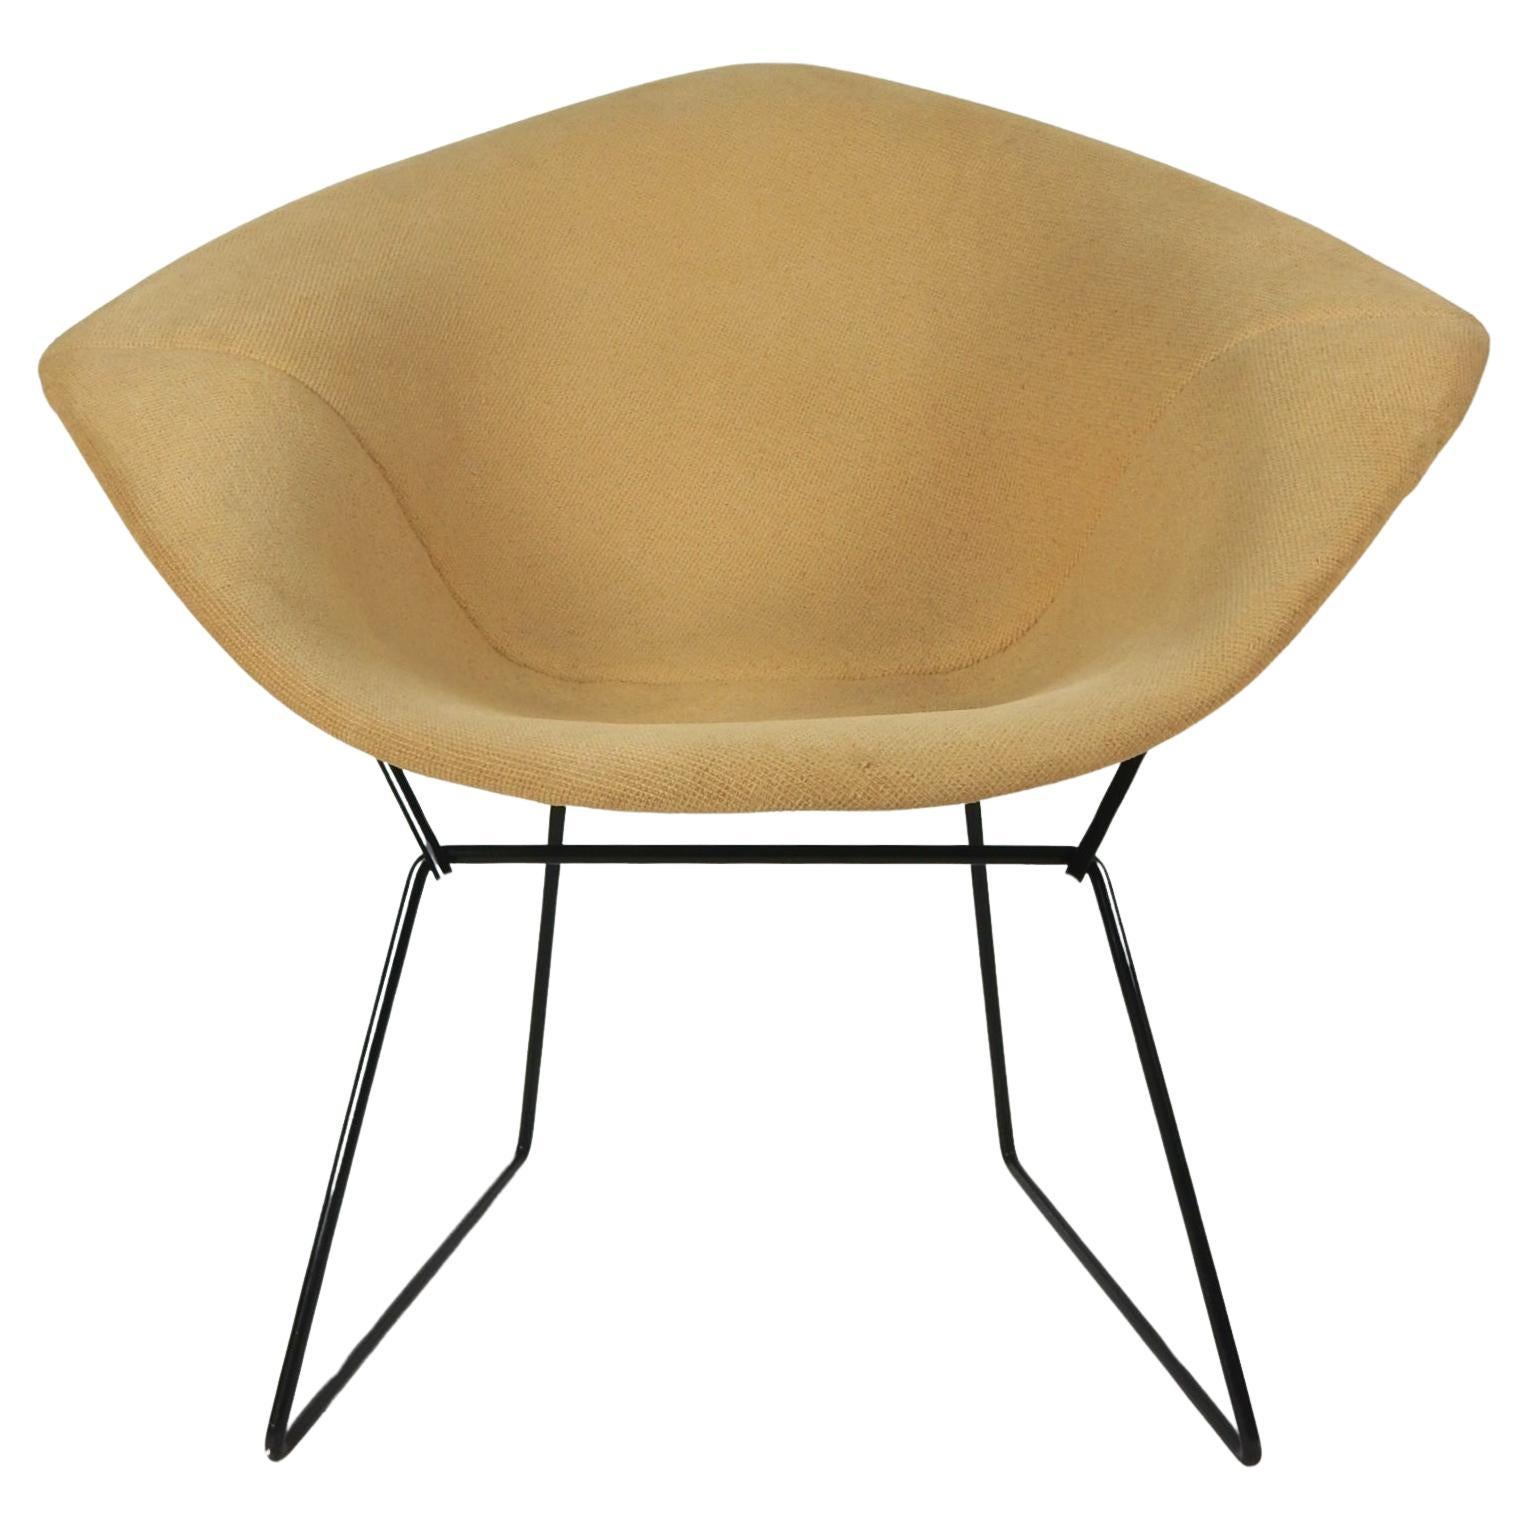 Original 1953 Harry Bertoia Diamond Chair for H. G. Knoll Products For Sale